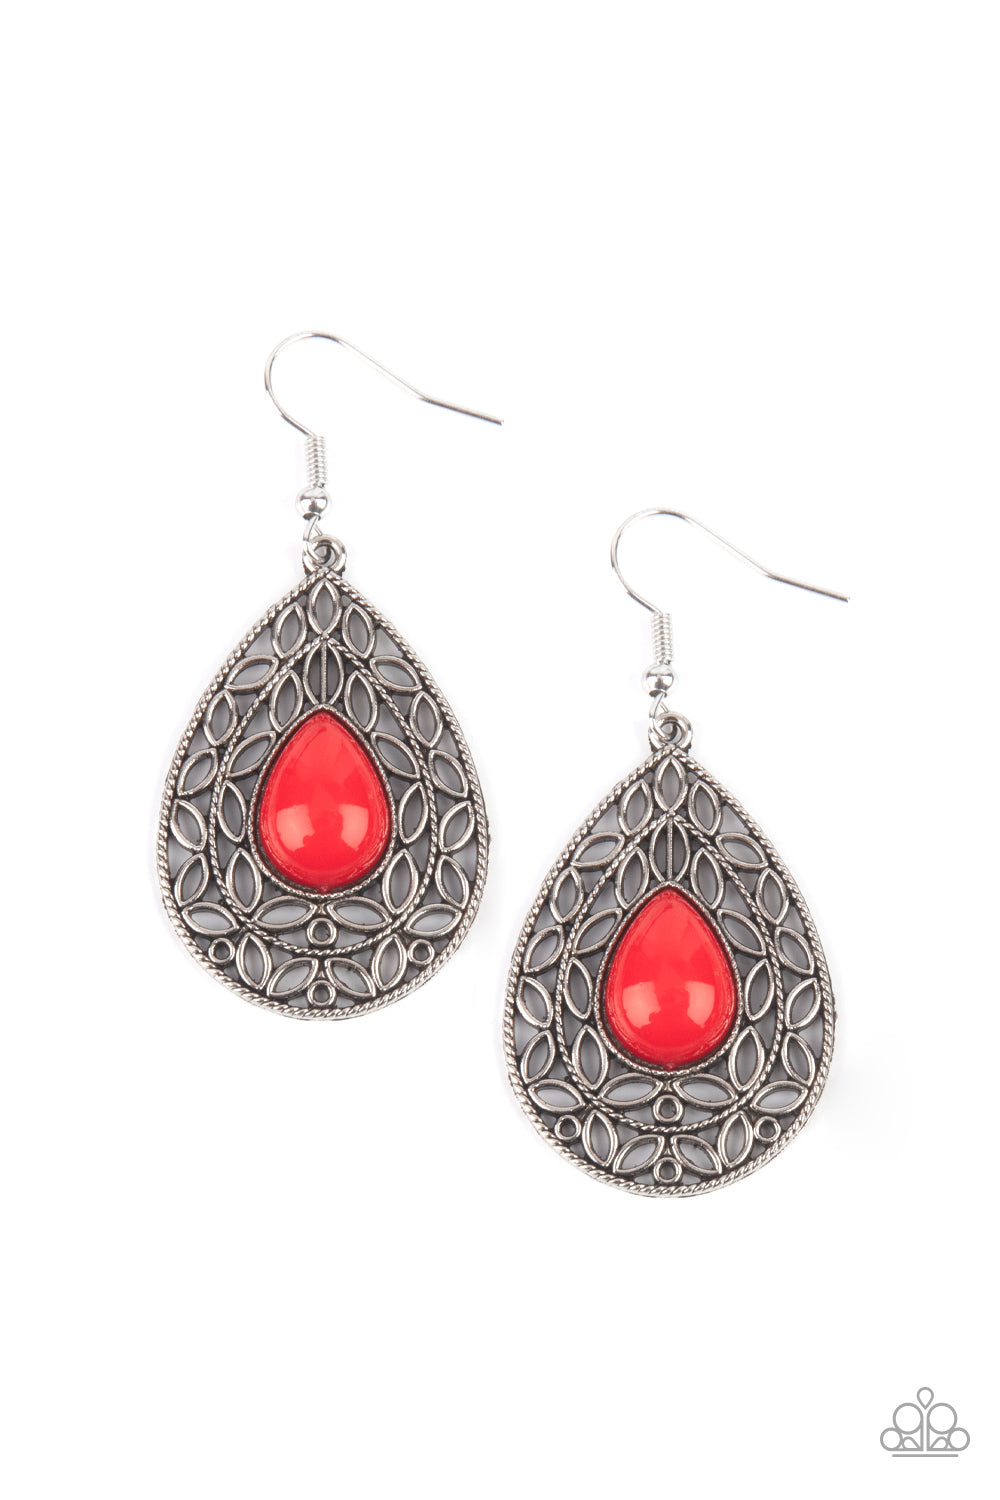 Paparazzi Earring - Fanciful Droplets - Red